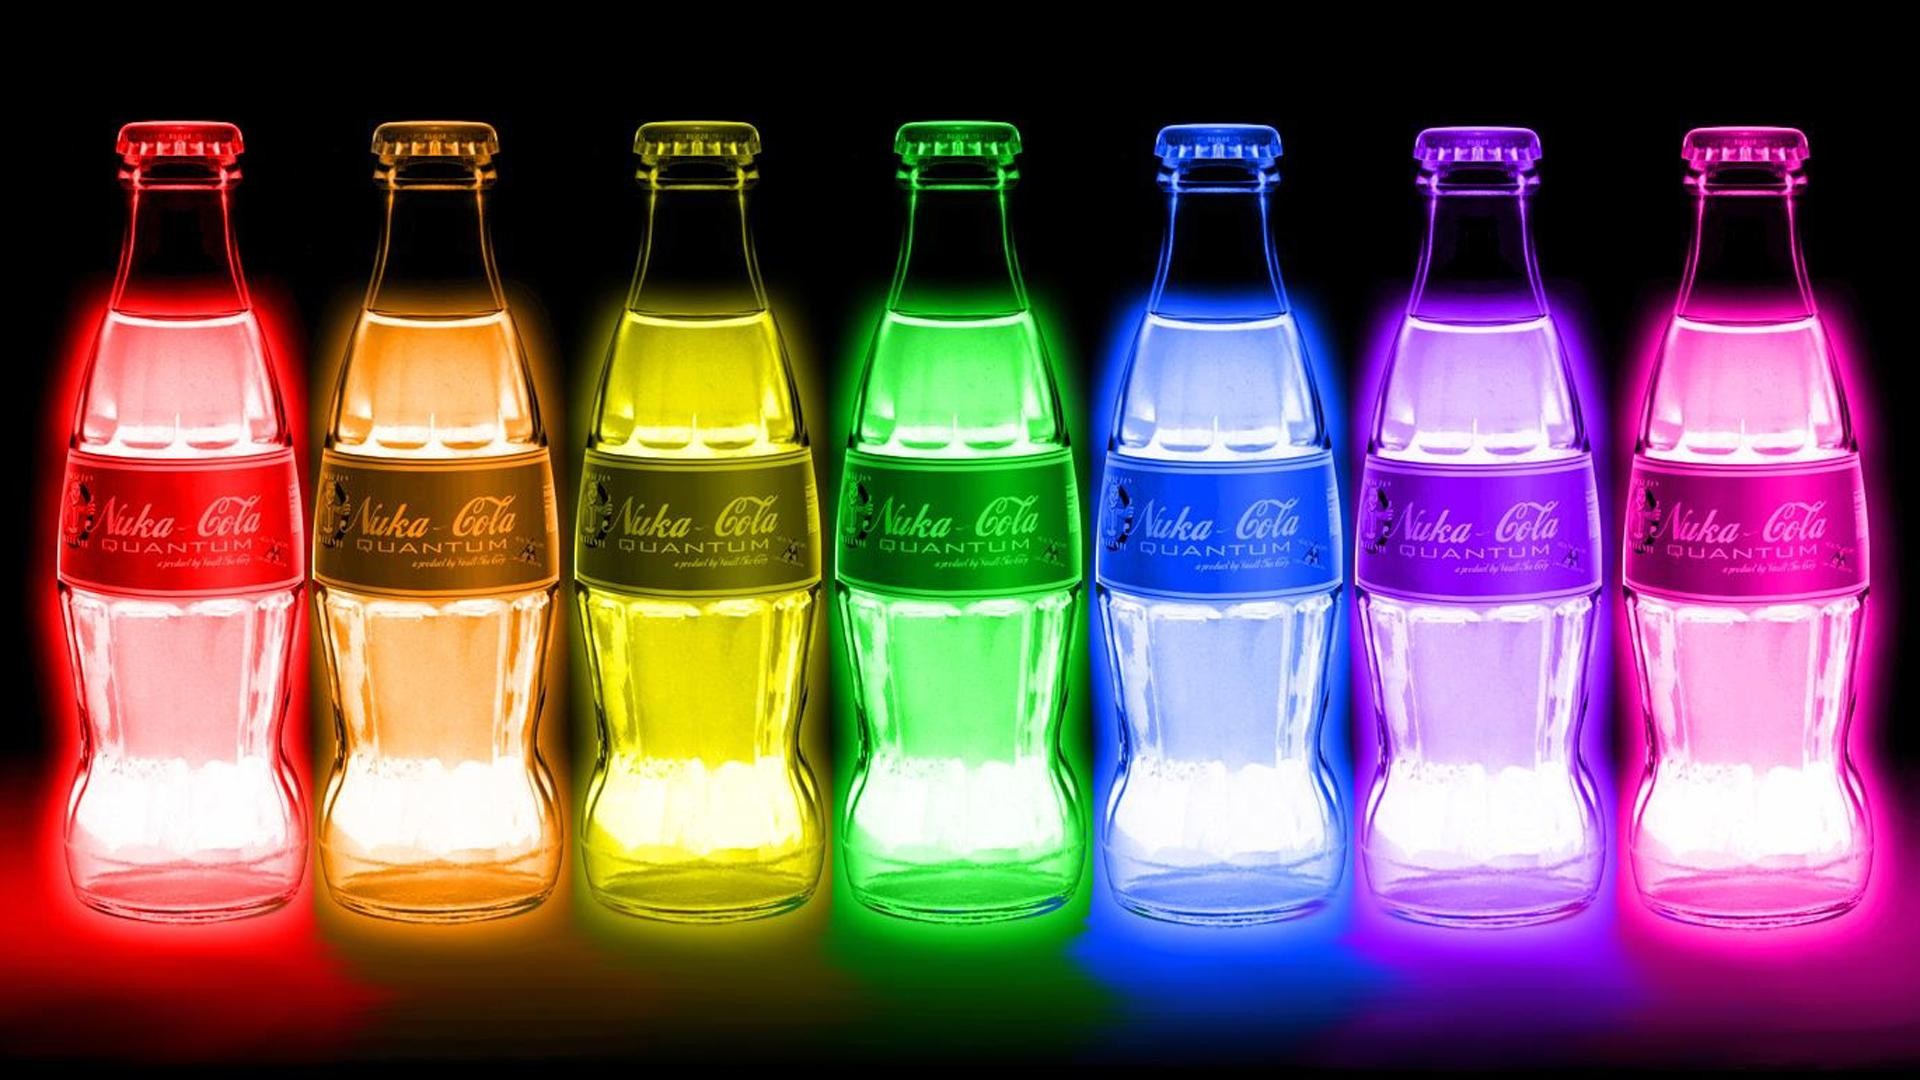 General 1920x1080 Fallout video games glowing spectrum colorful soda bottles Nuka-Cola PC gaming video game art